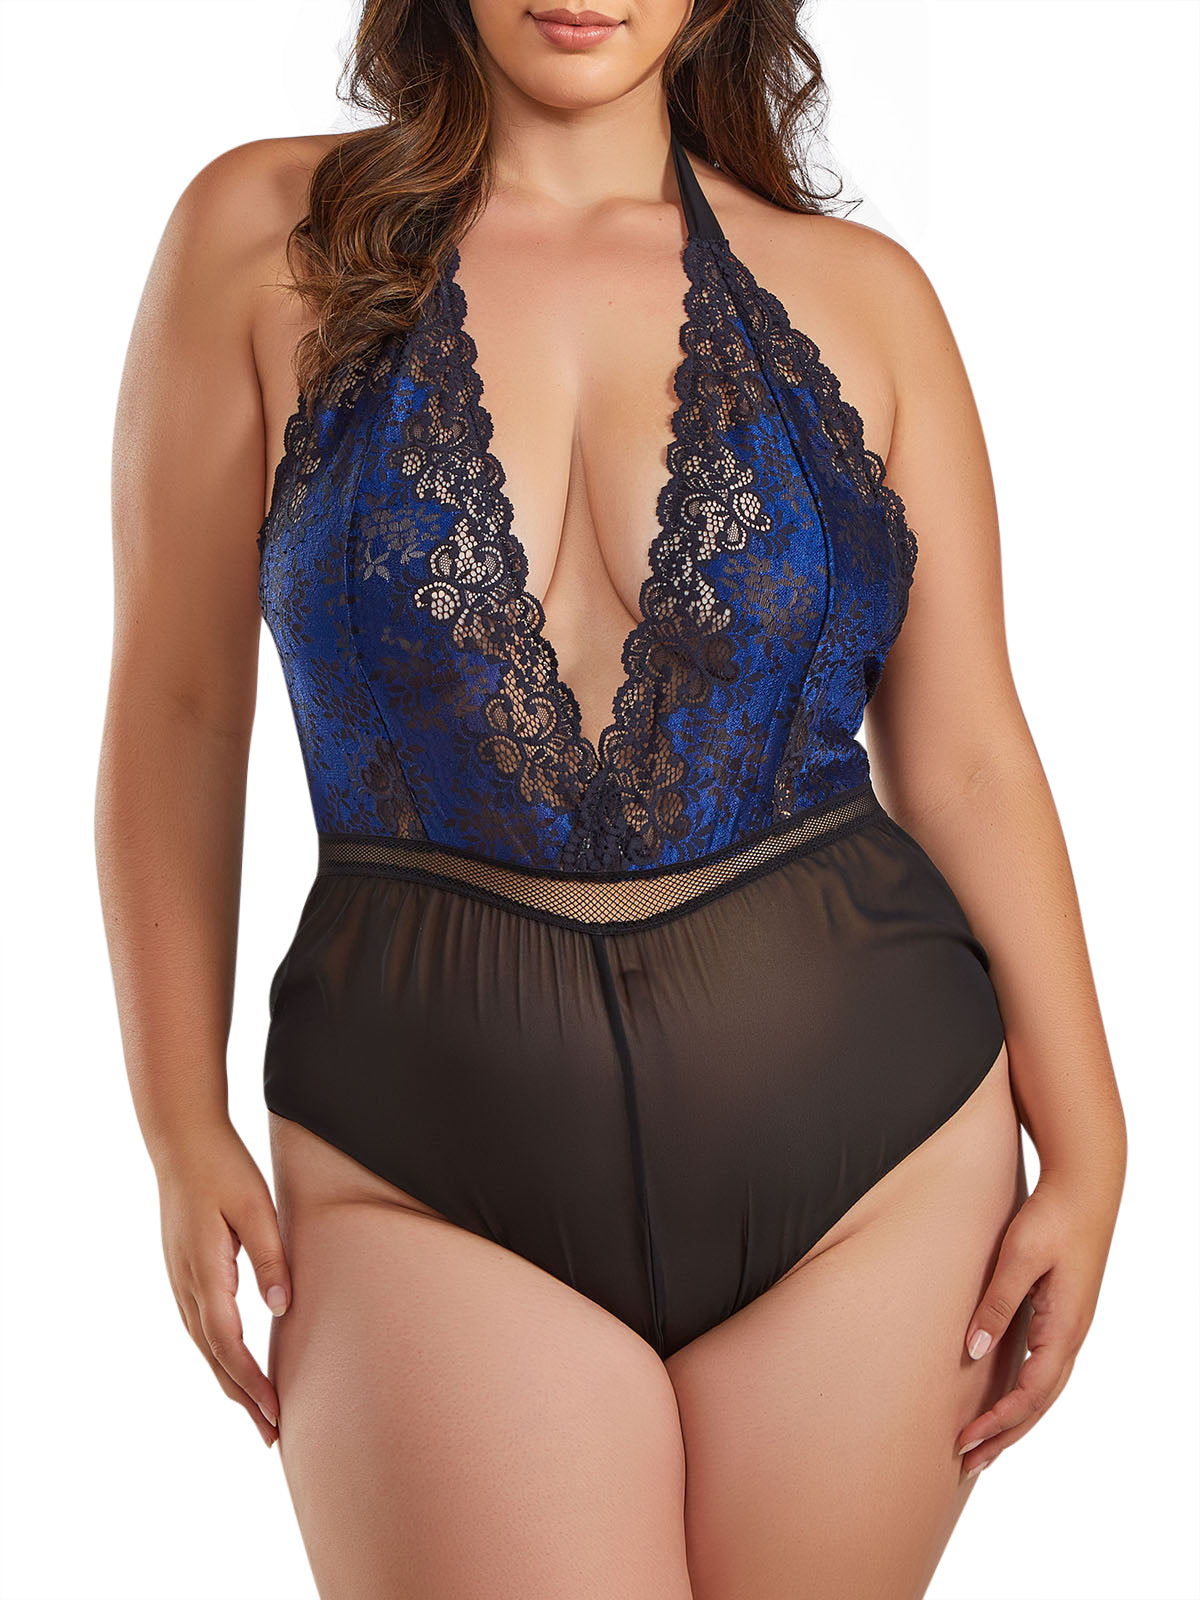 iCollection Teddy Women's Marley Plus Size Teddy Lingerie